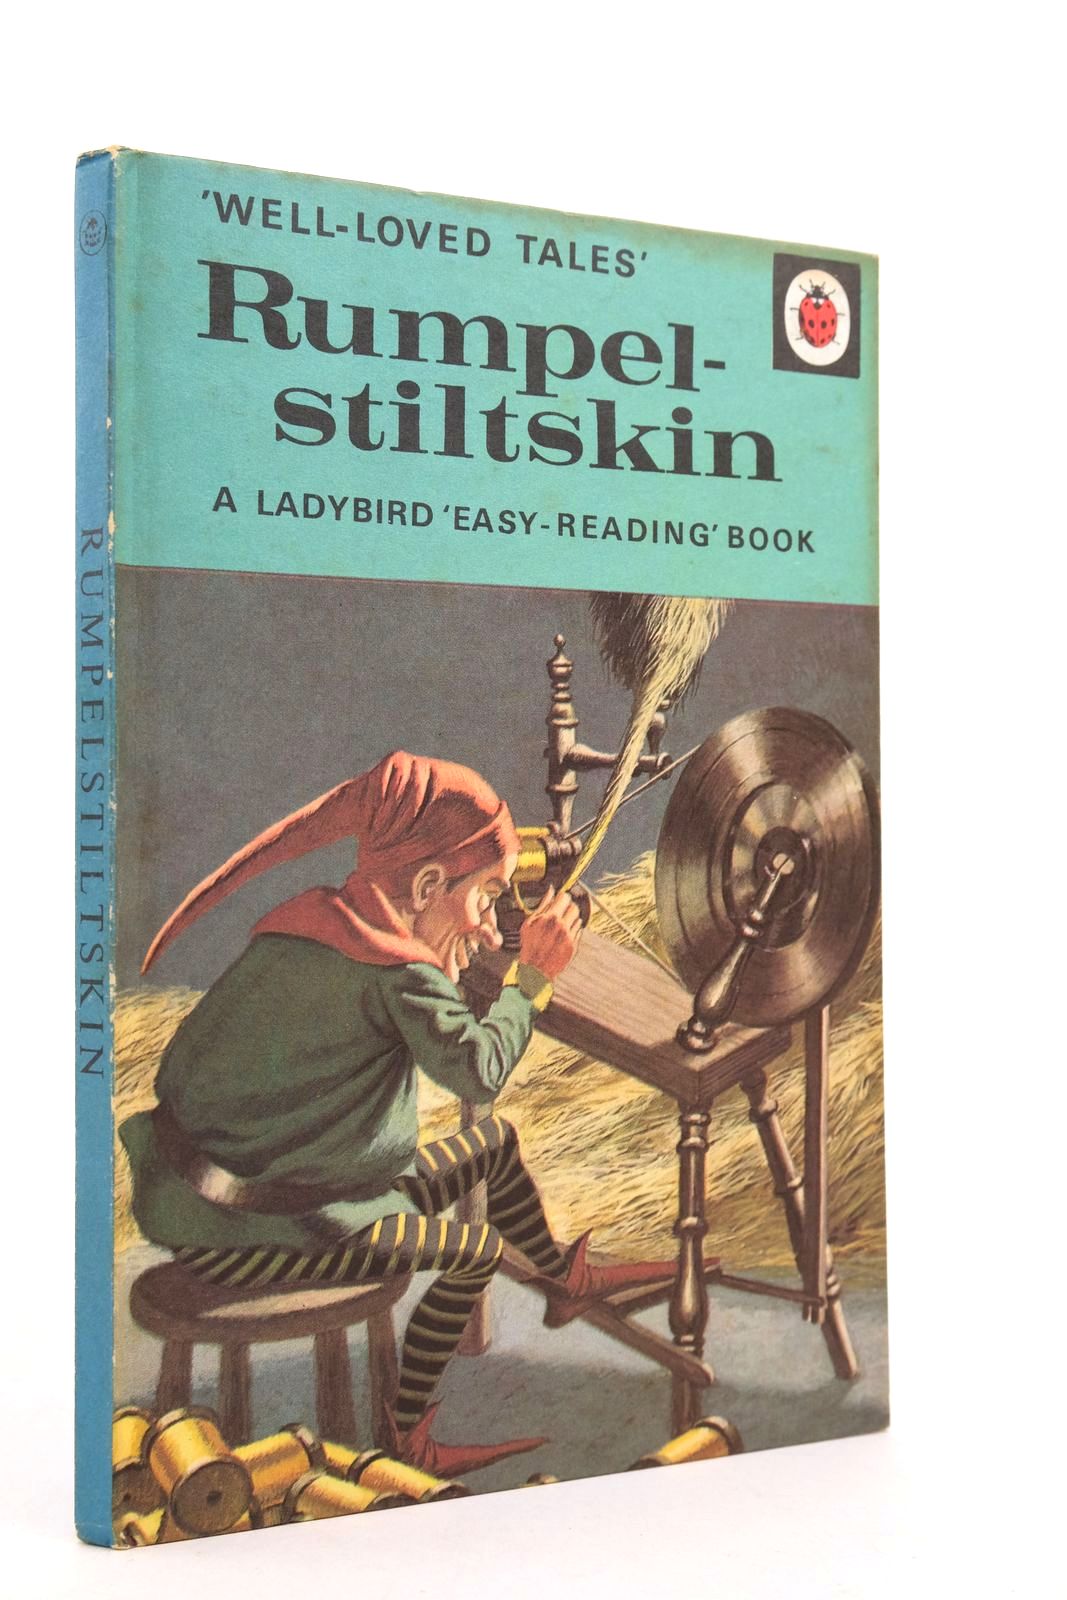 Photo of RUMPELSTILTSKIN written by Southgate, Vera illustrated by Winter, Eric published by Wills & Hepworth Ltd. (STOCK CODE: 2140244)  for sale by Stella & Rose's Books